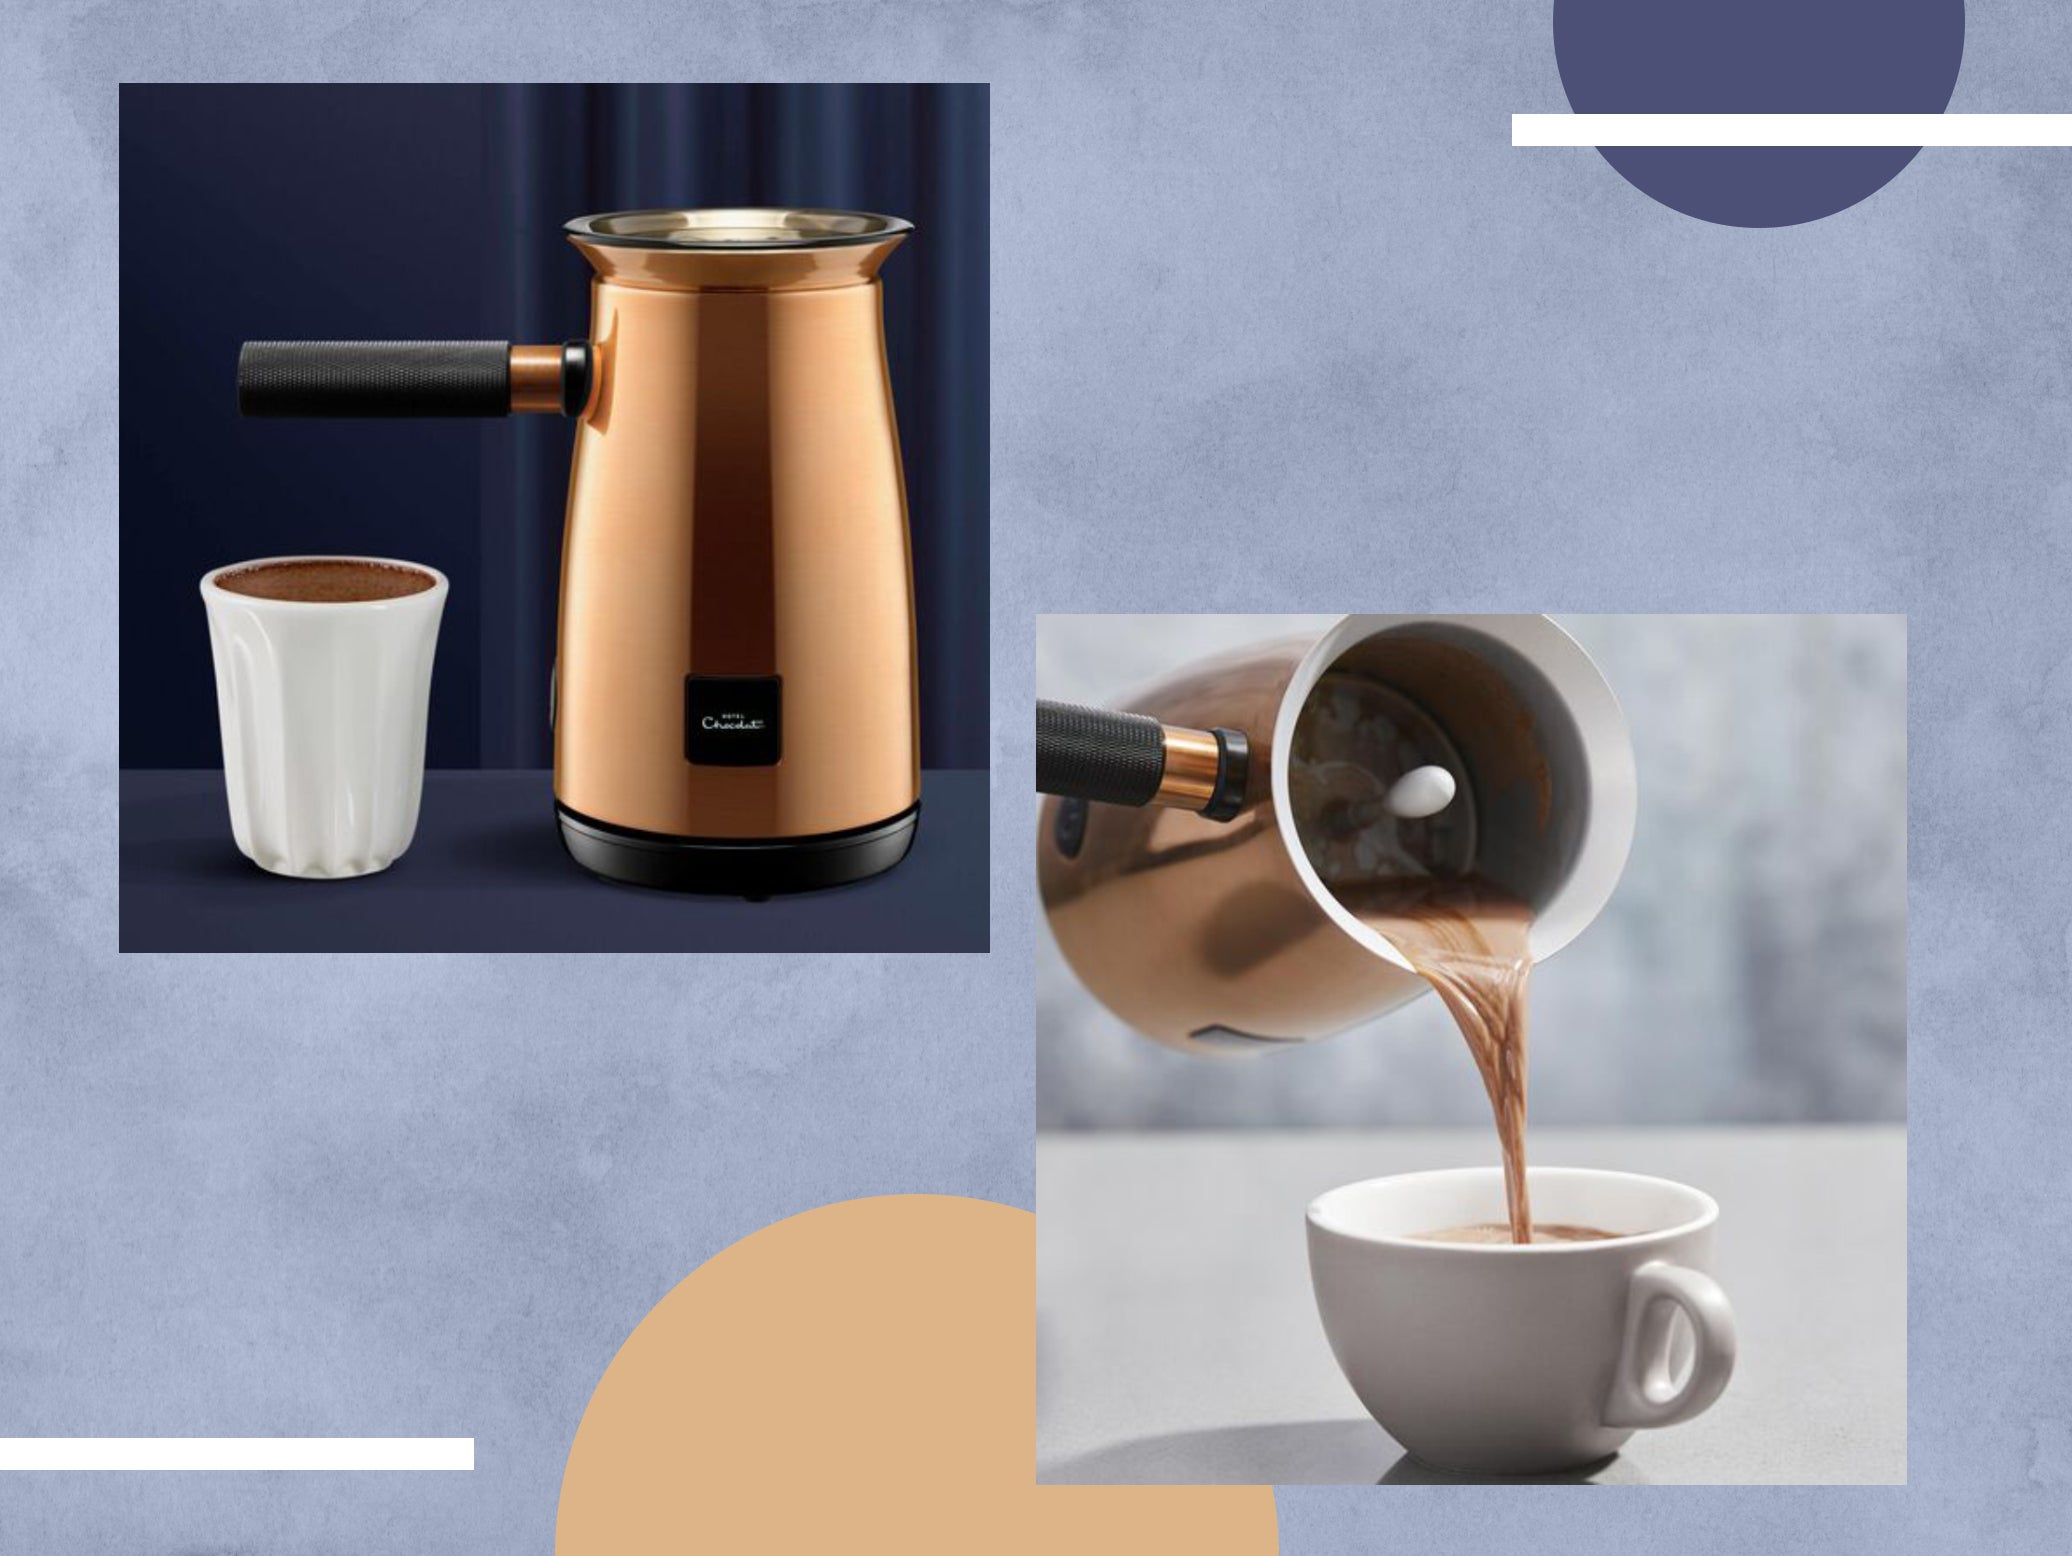 How to get Hotel Chocolat's velvetiser for £20 off today